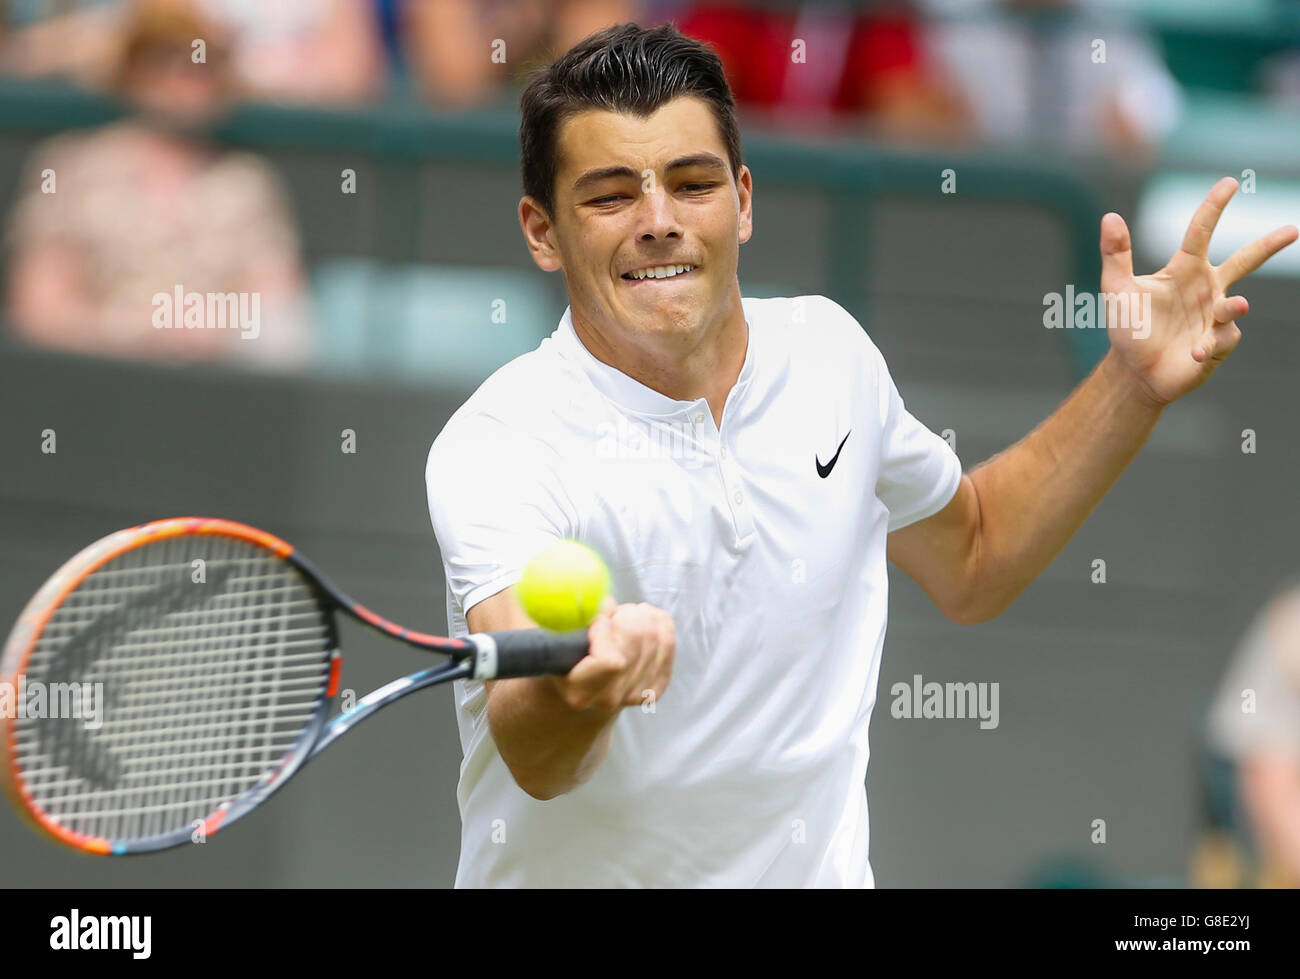 London, UK. 28th June, 2016. Taylor Fritz of the United States returns the ball during the men's singles first round match against Stan Wawrinka of Switzerland on Day 2 of the 2016 Wimbledon Tennis Championships in London, on June 28, 2016. Taylor Fritz lost 1-3. © Ye Pingfan/Xinhua/Alamy Live News Stock Photo